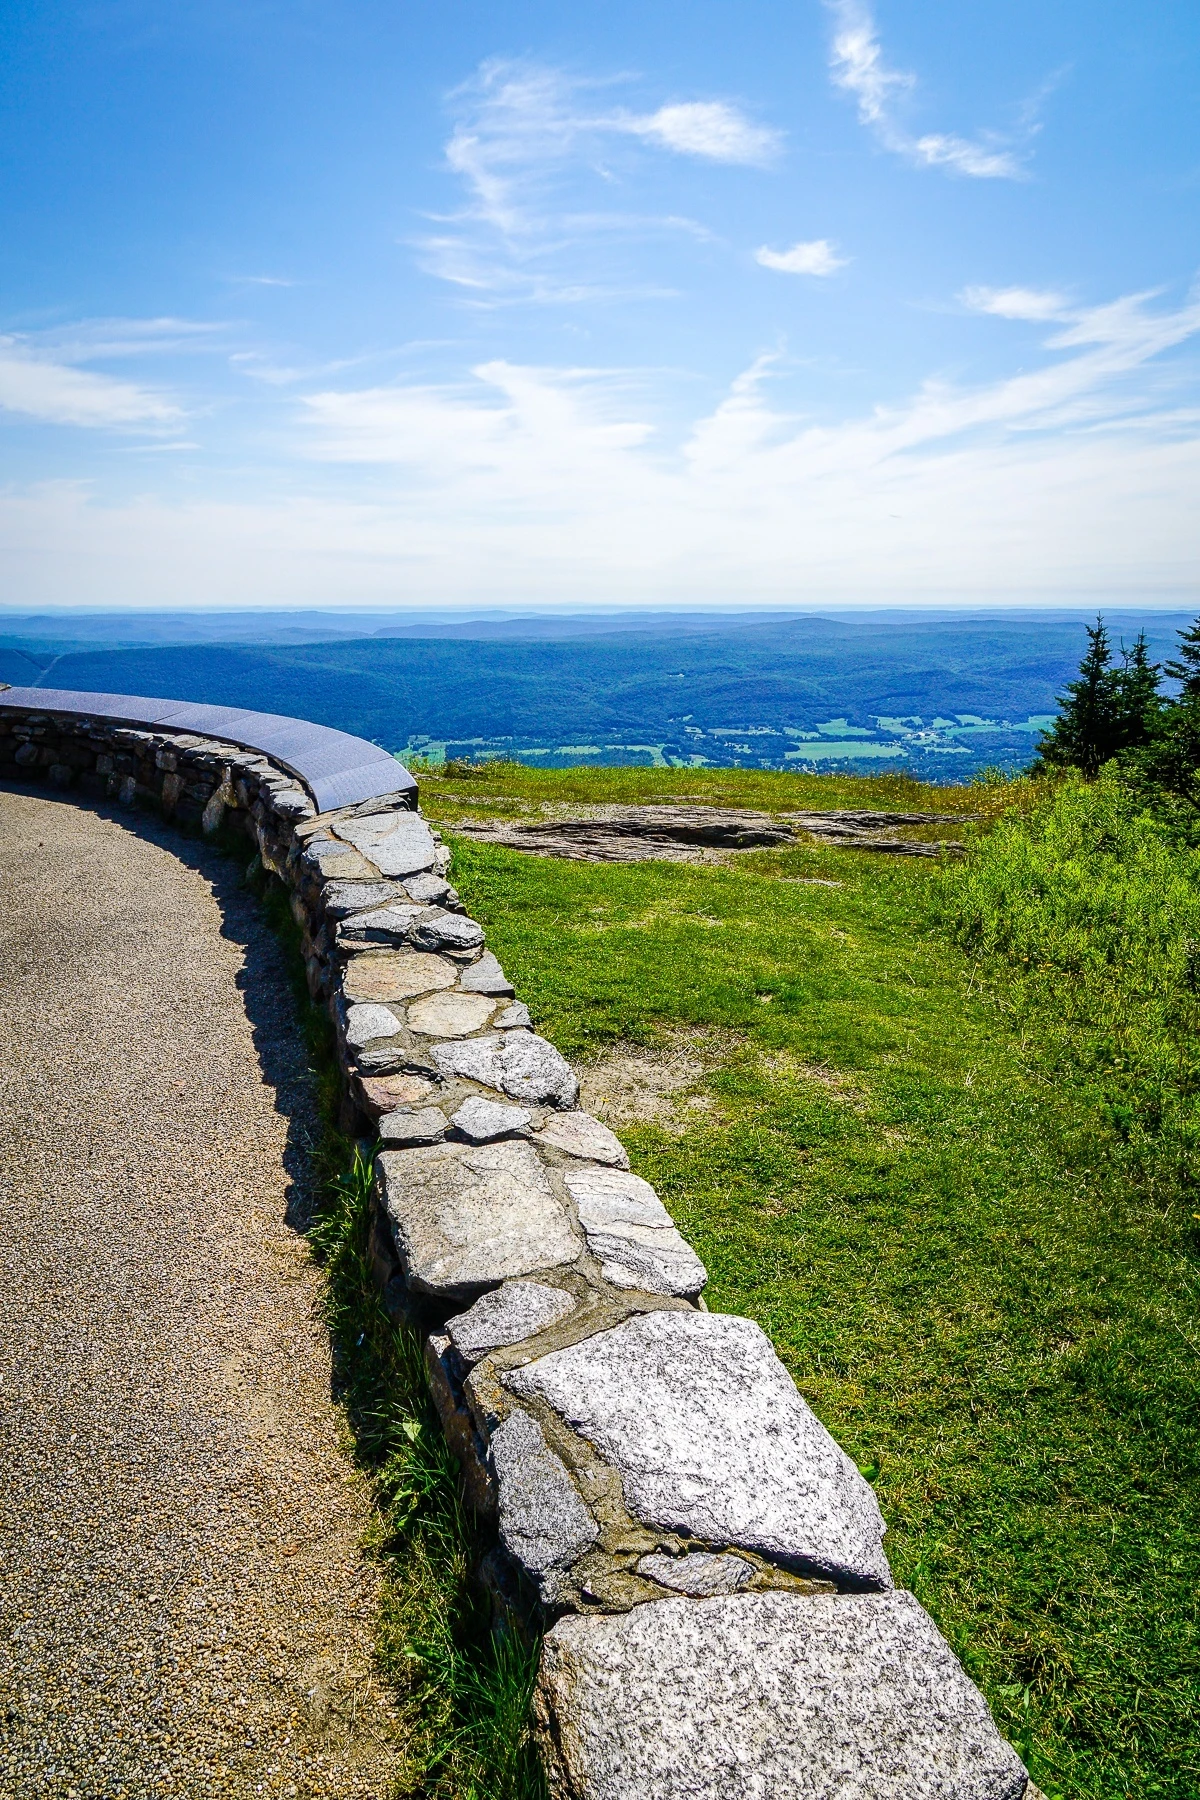 Planning travel to Mount Greylock, the highest point in Massachusetts? Here's the easiest way up the mountain to see great New England views, even with young kids. 